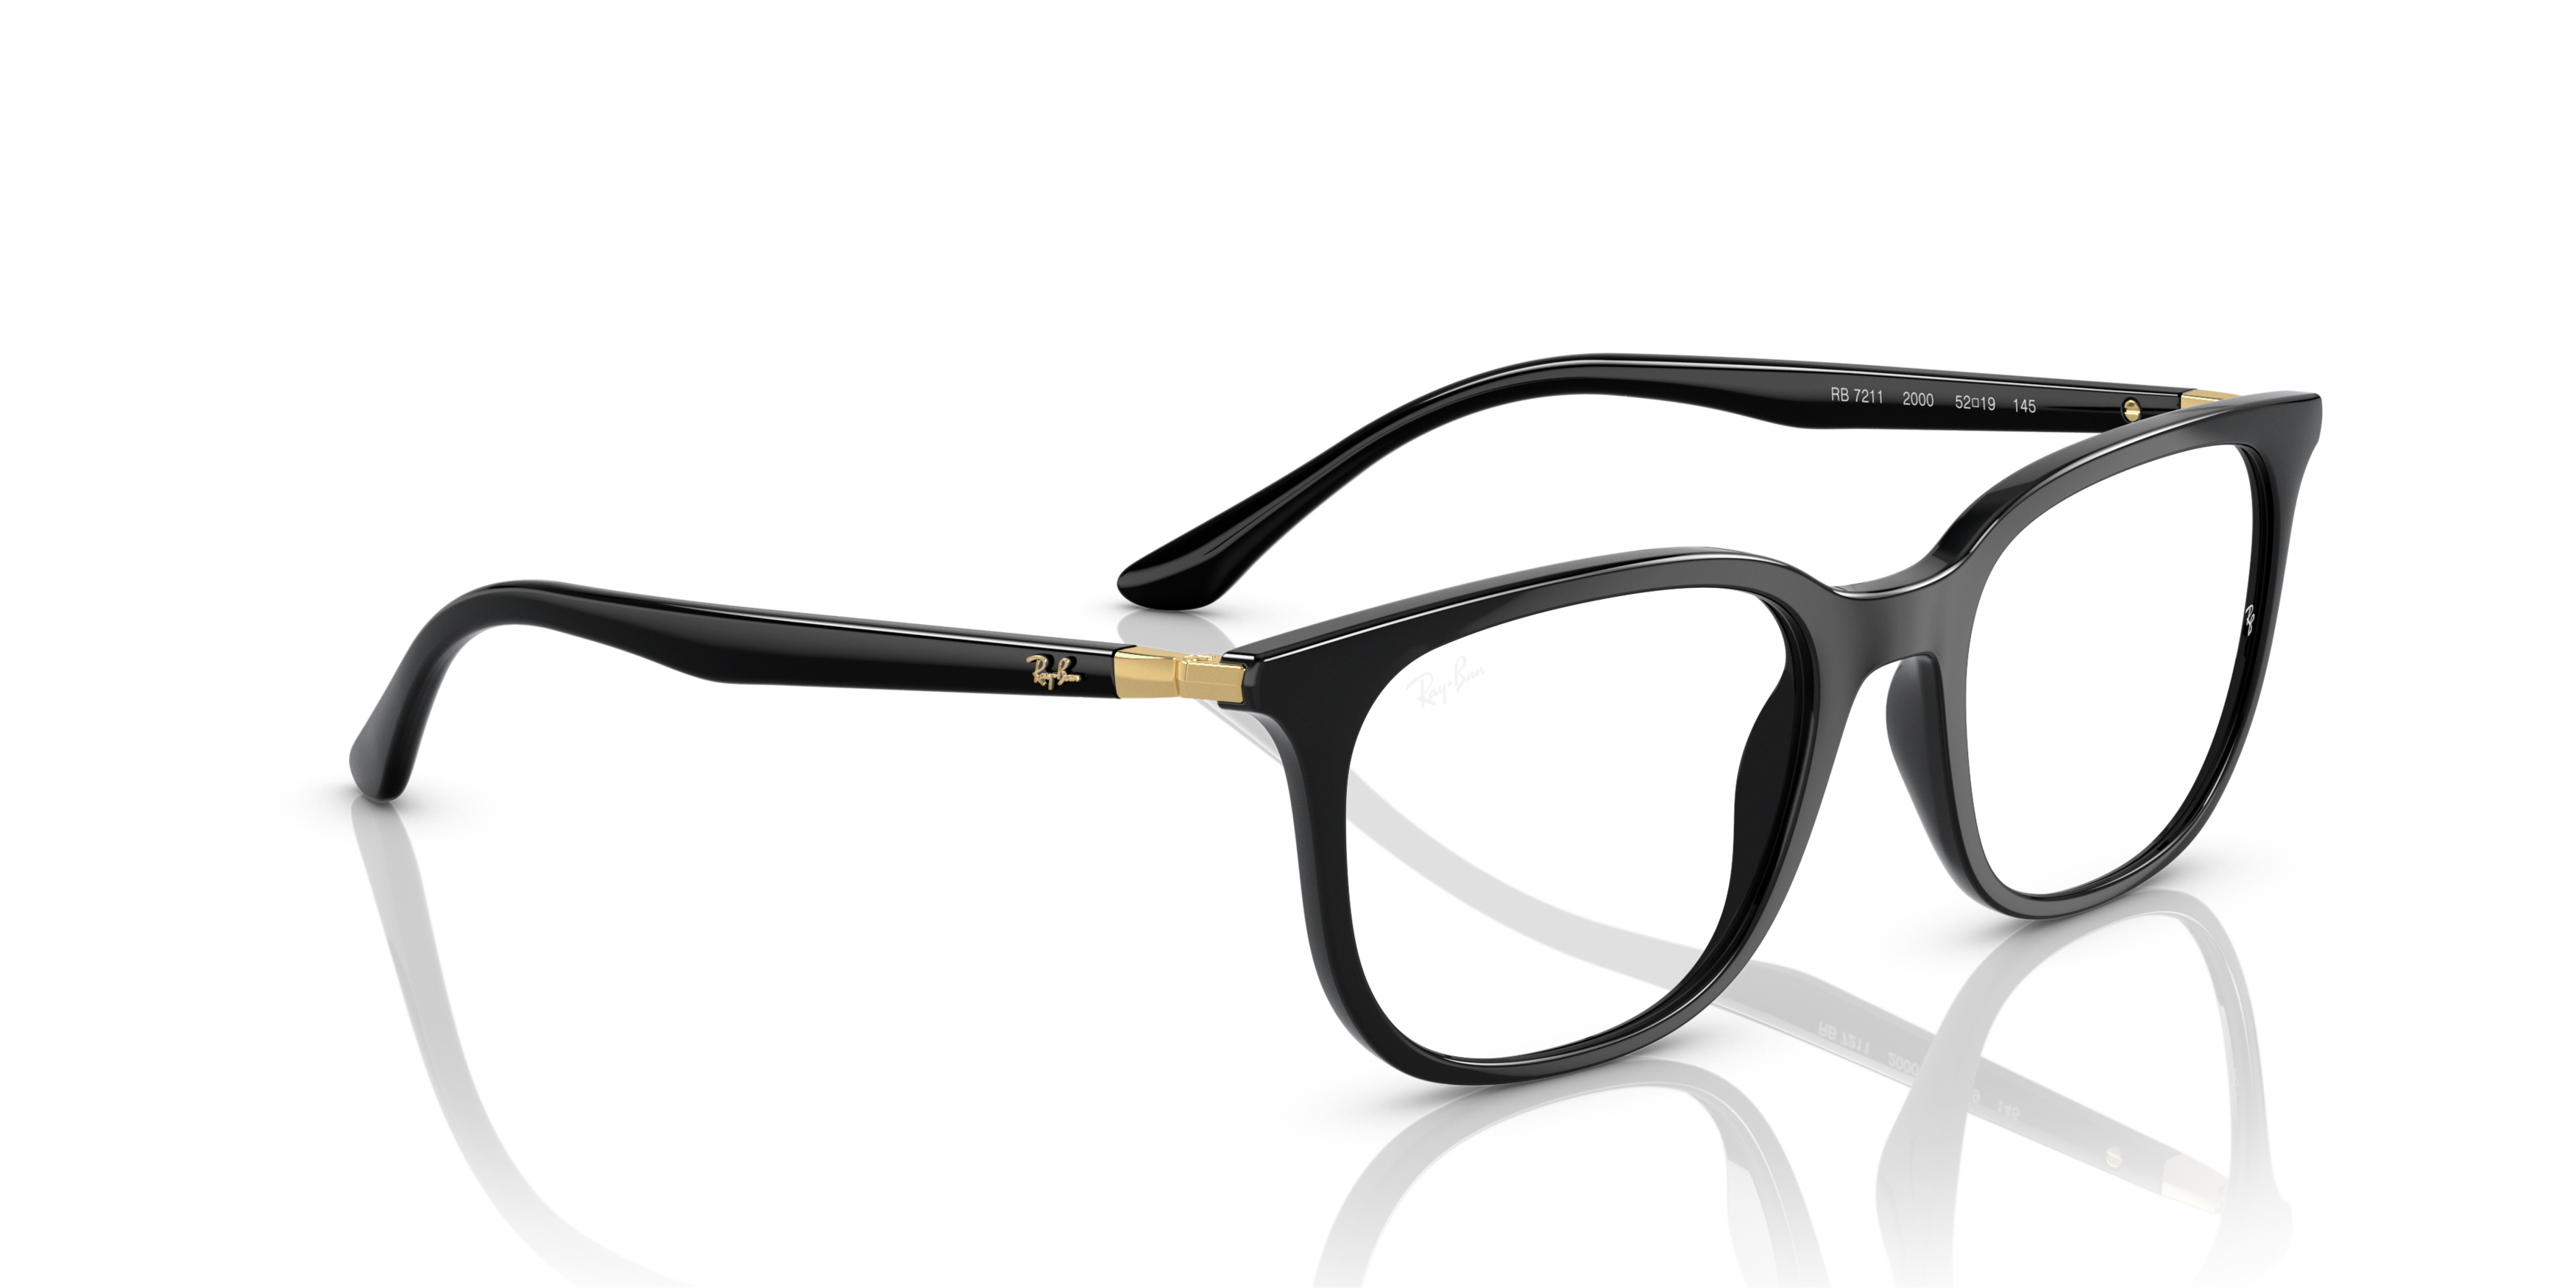 Angle_Right01 Ray-Ban RX 7211 Glasses Transparent / Black